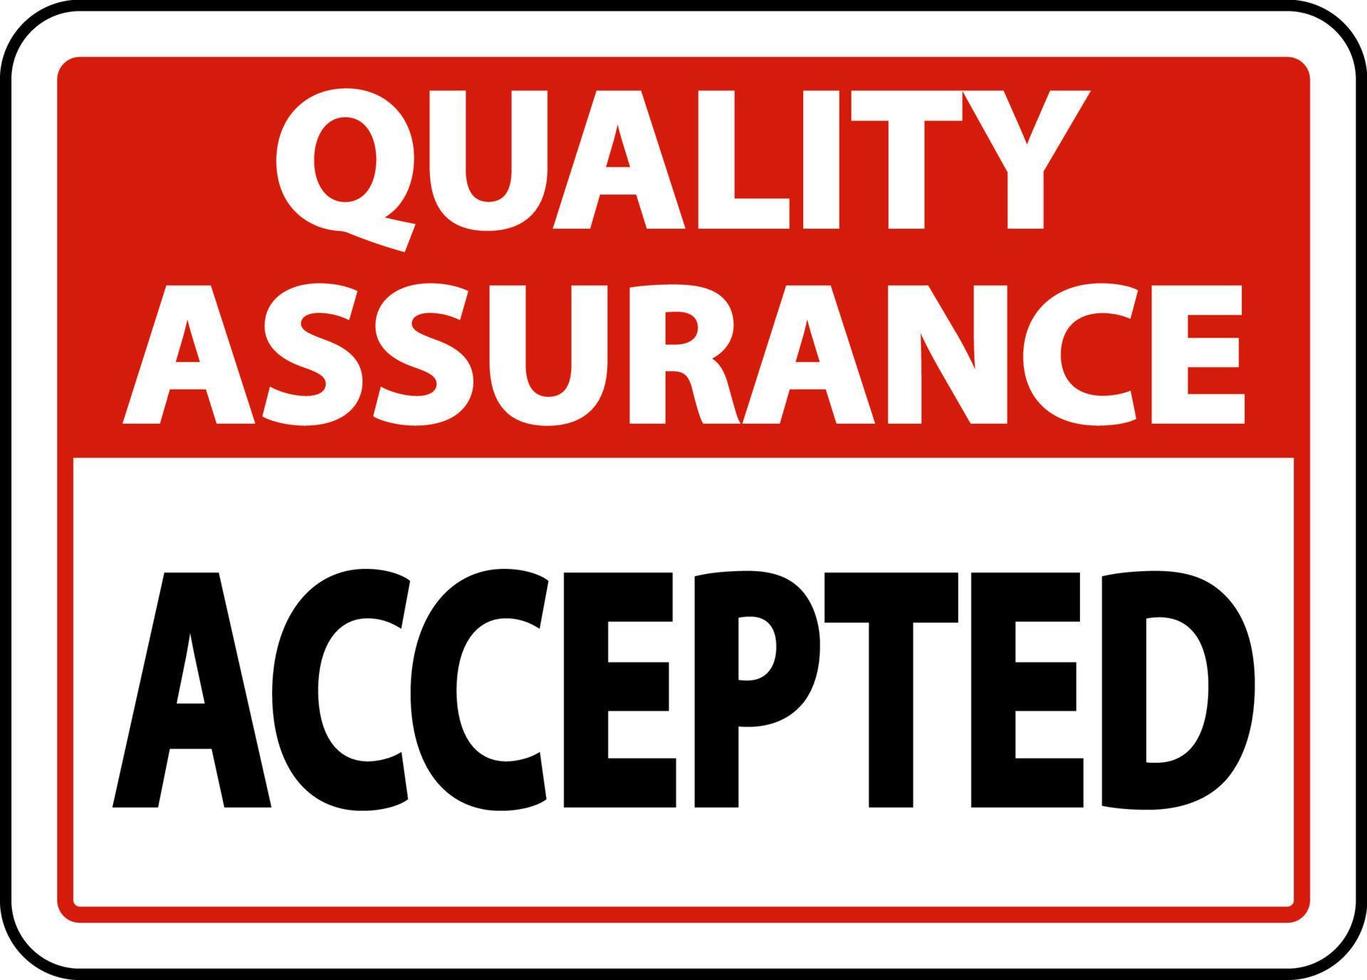 Quality Assurance Accepted Sign vector